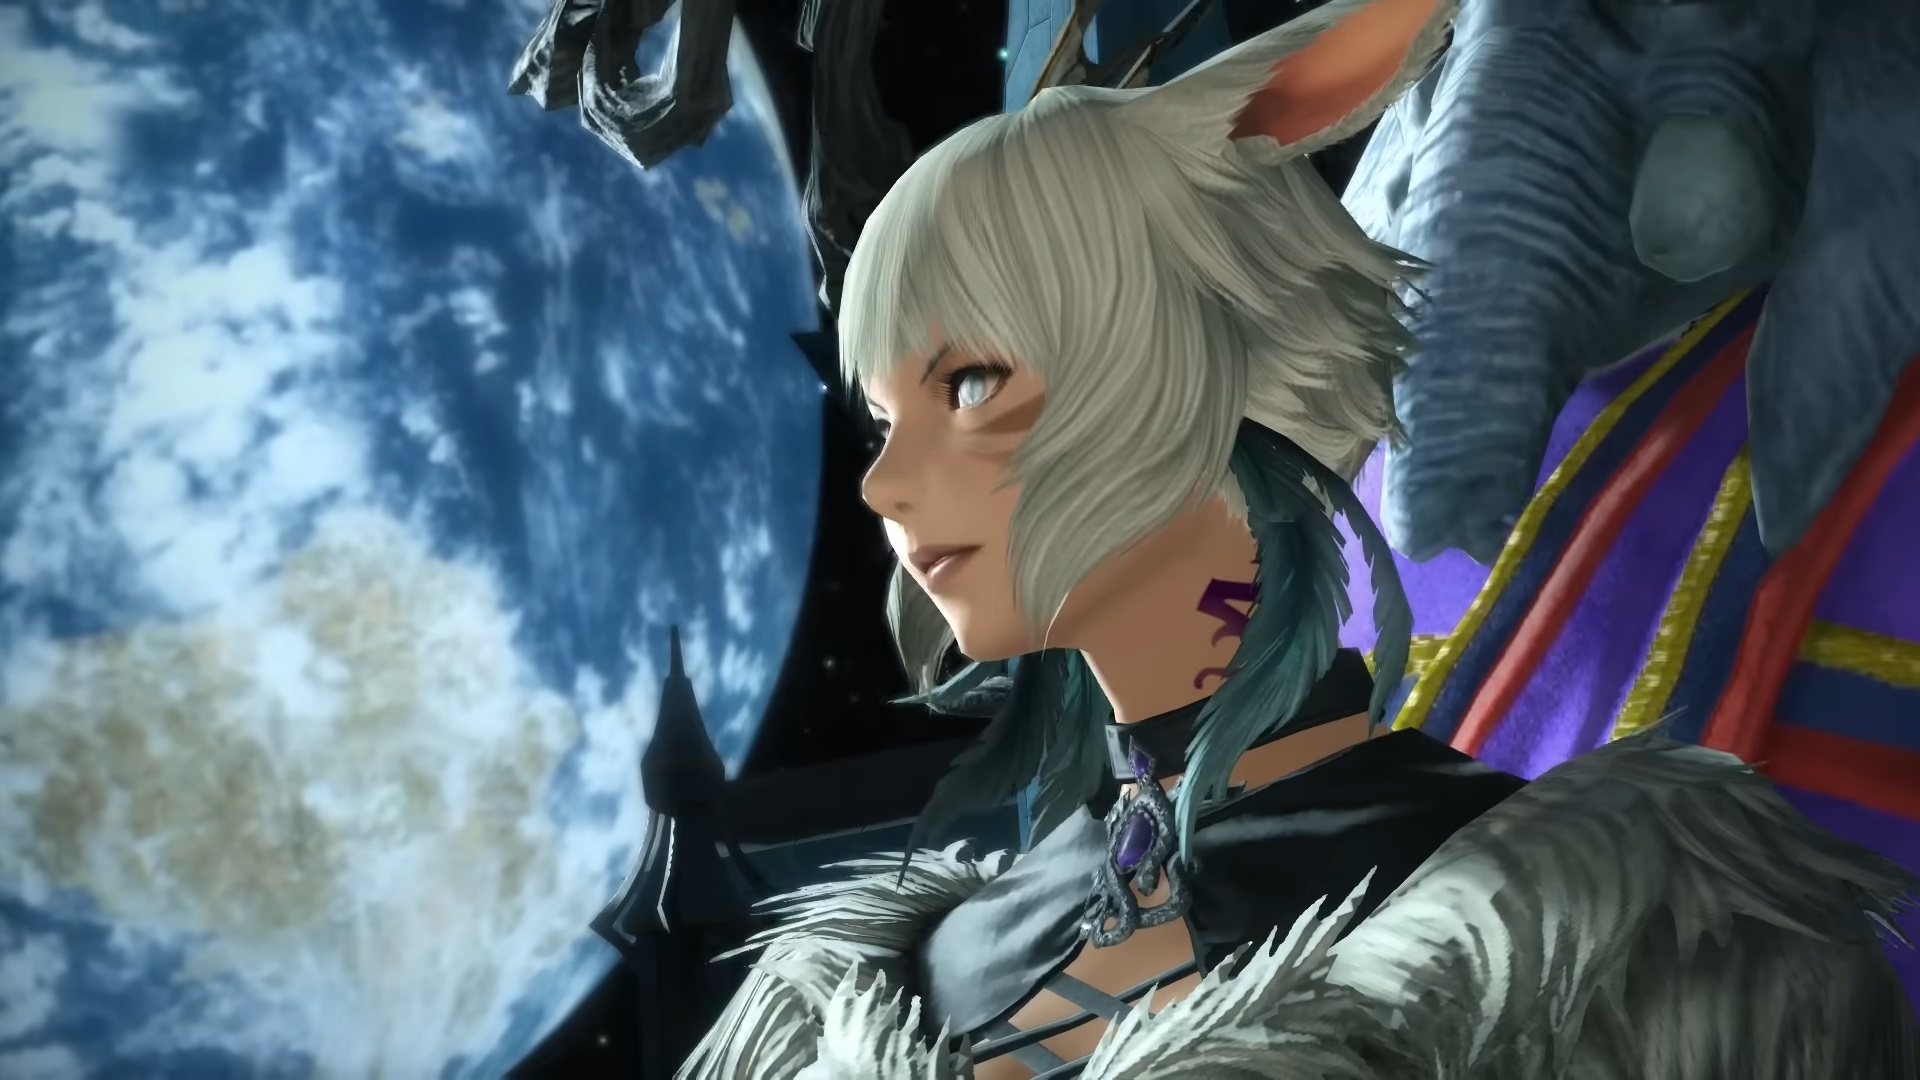 The grandfather of MMOs like WoW and FF14 shutting down after 27 years